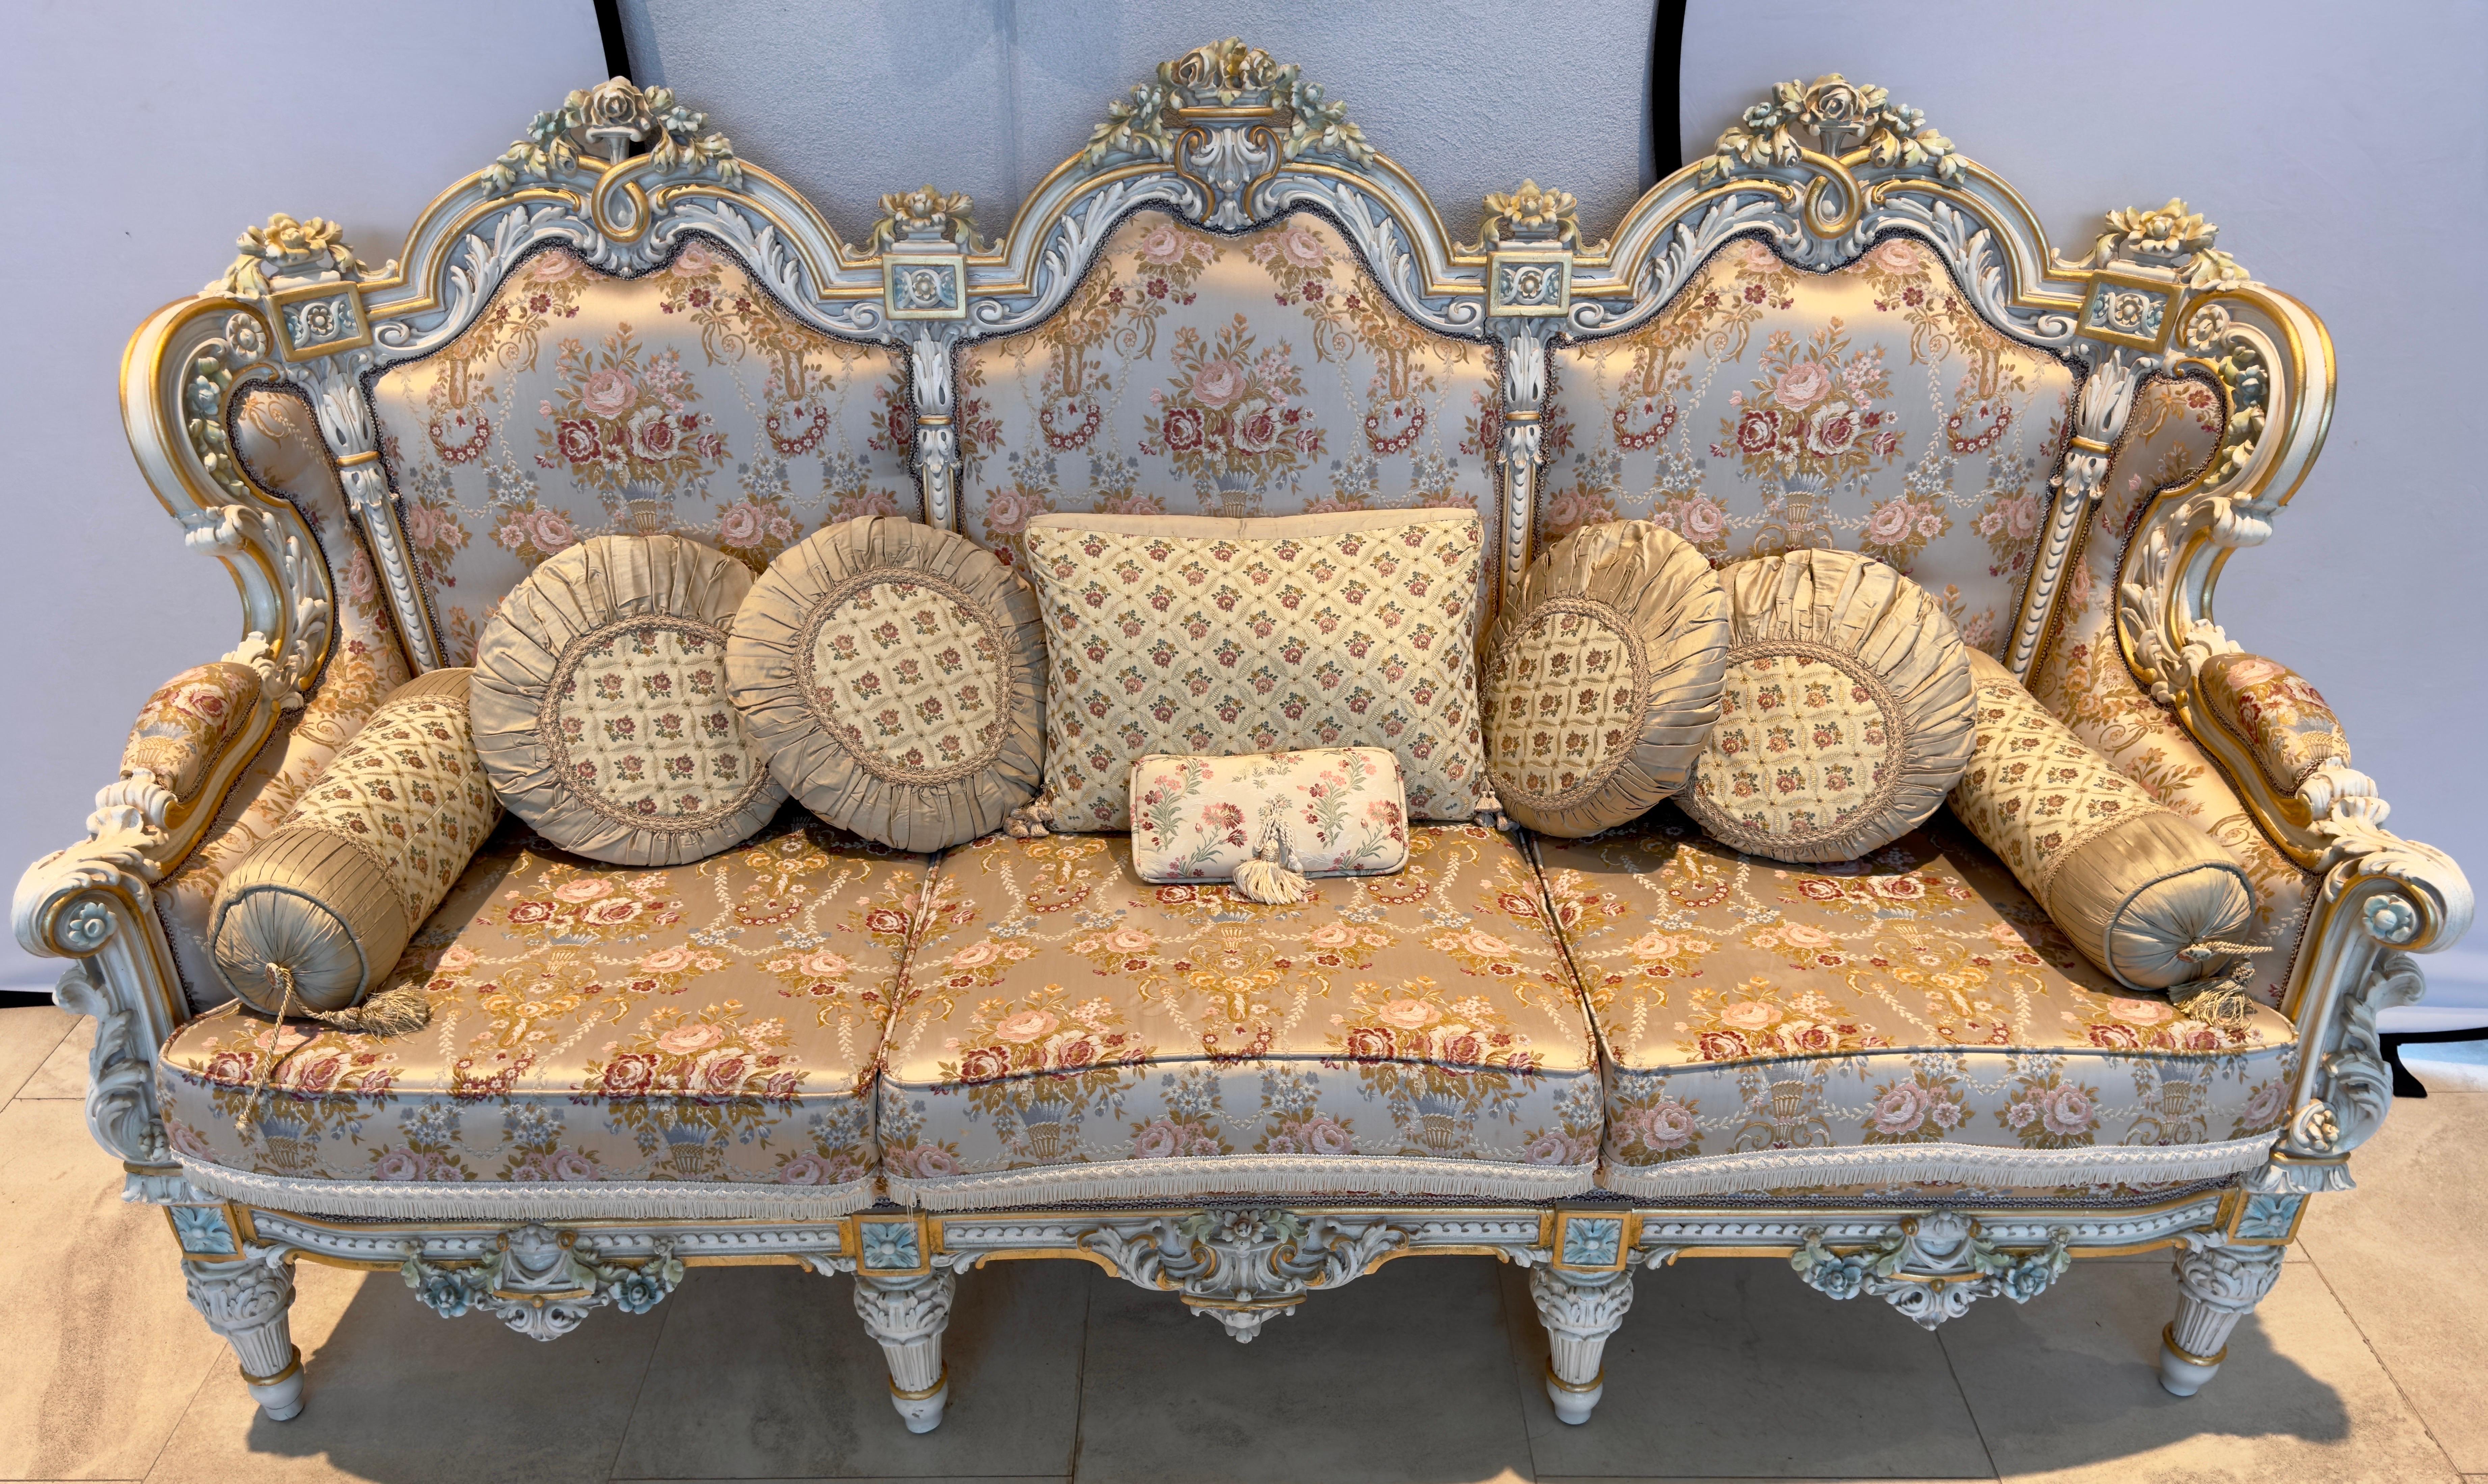 Italian Neoclassical Baroque Style Sofa with fine floral silk upholstery  For Sale 2